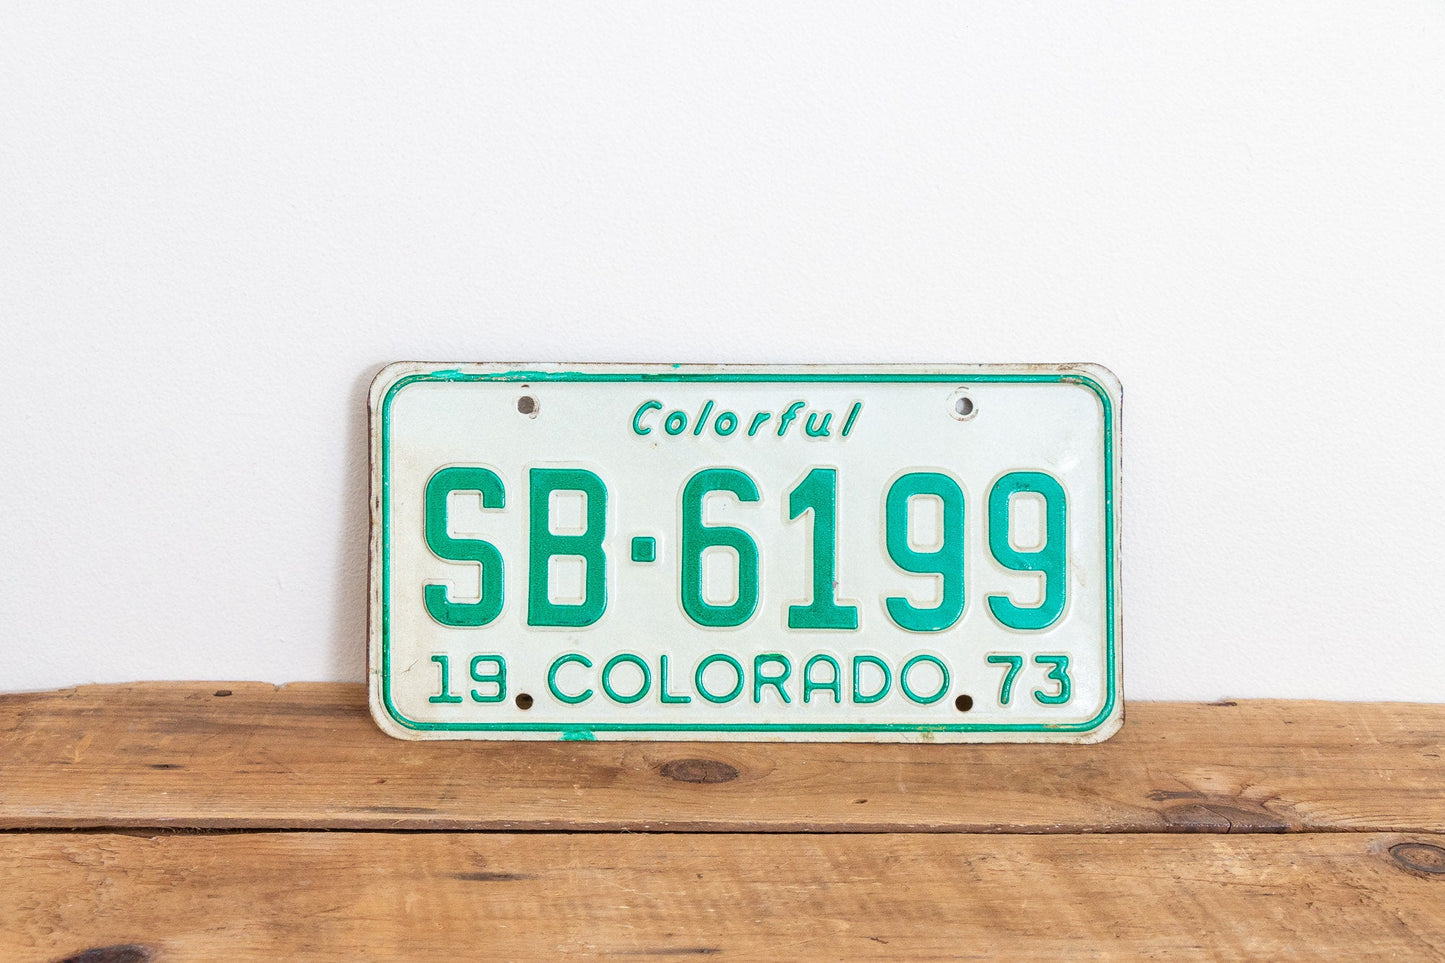 Colorado 1973 License Plate Vintage Wall Hanging Decor - Eagle's Eye Finds